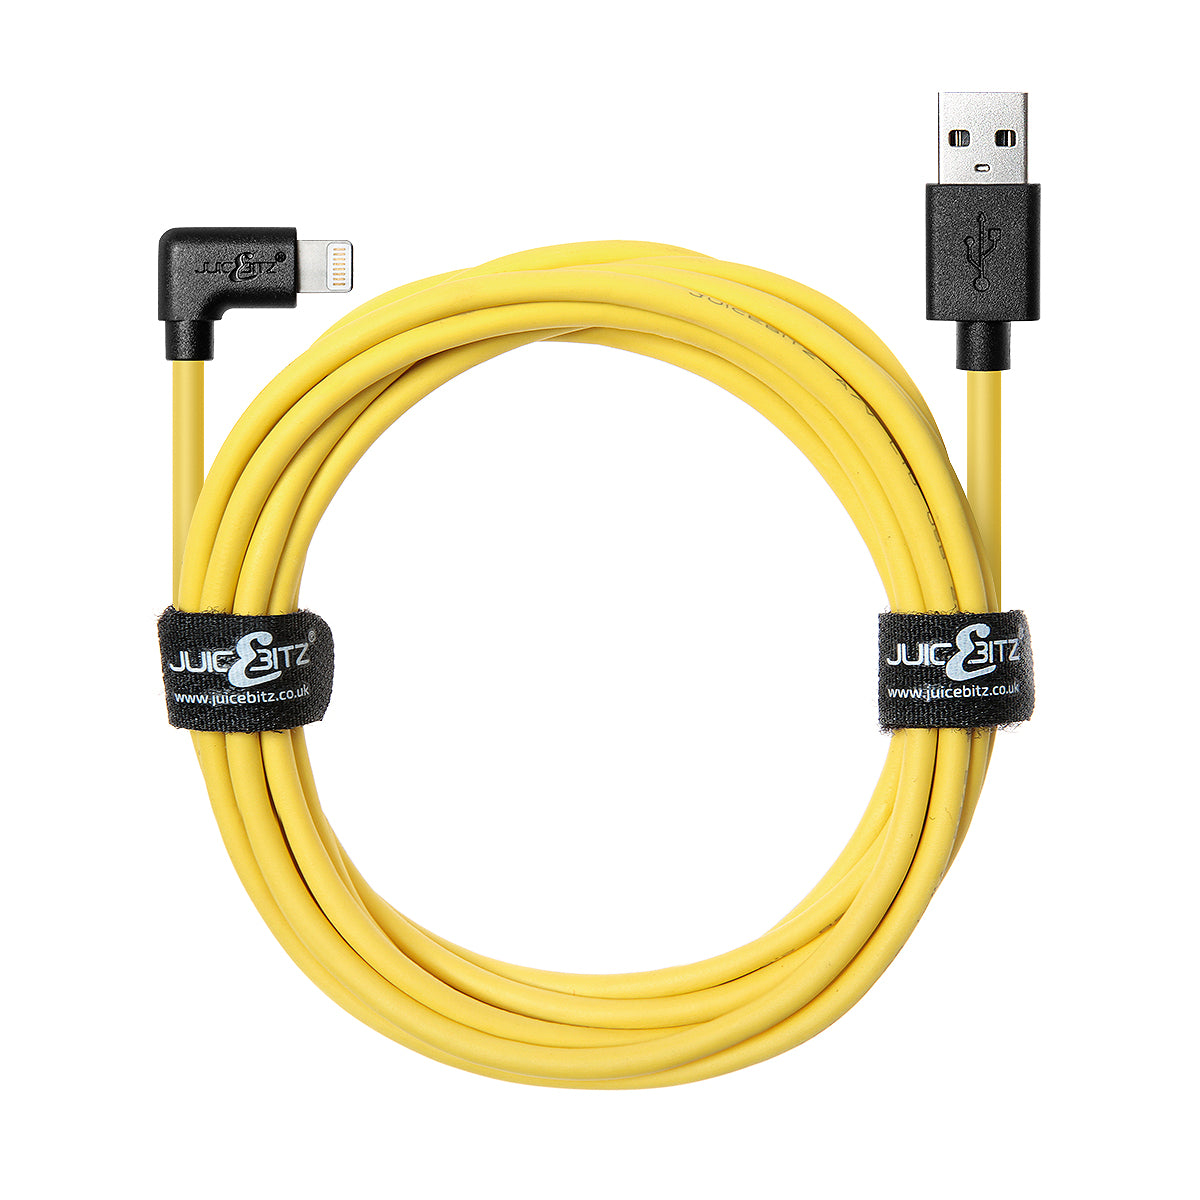 Heavy Duty Angled USB Charger Cable Data Sync Lead for iPhone, iPad, iPod - Yellow